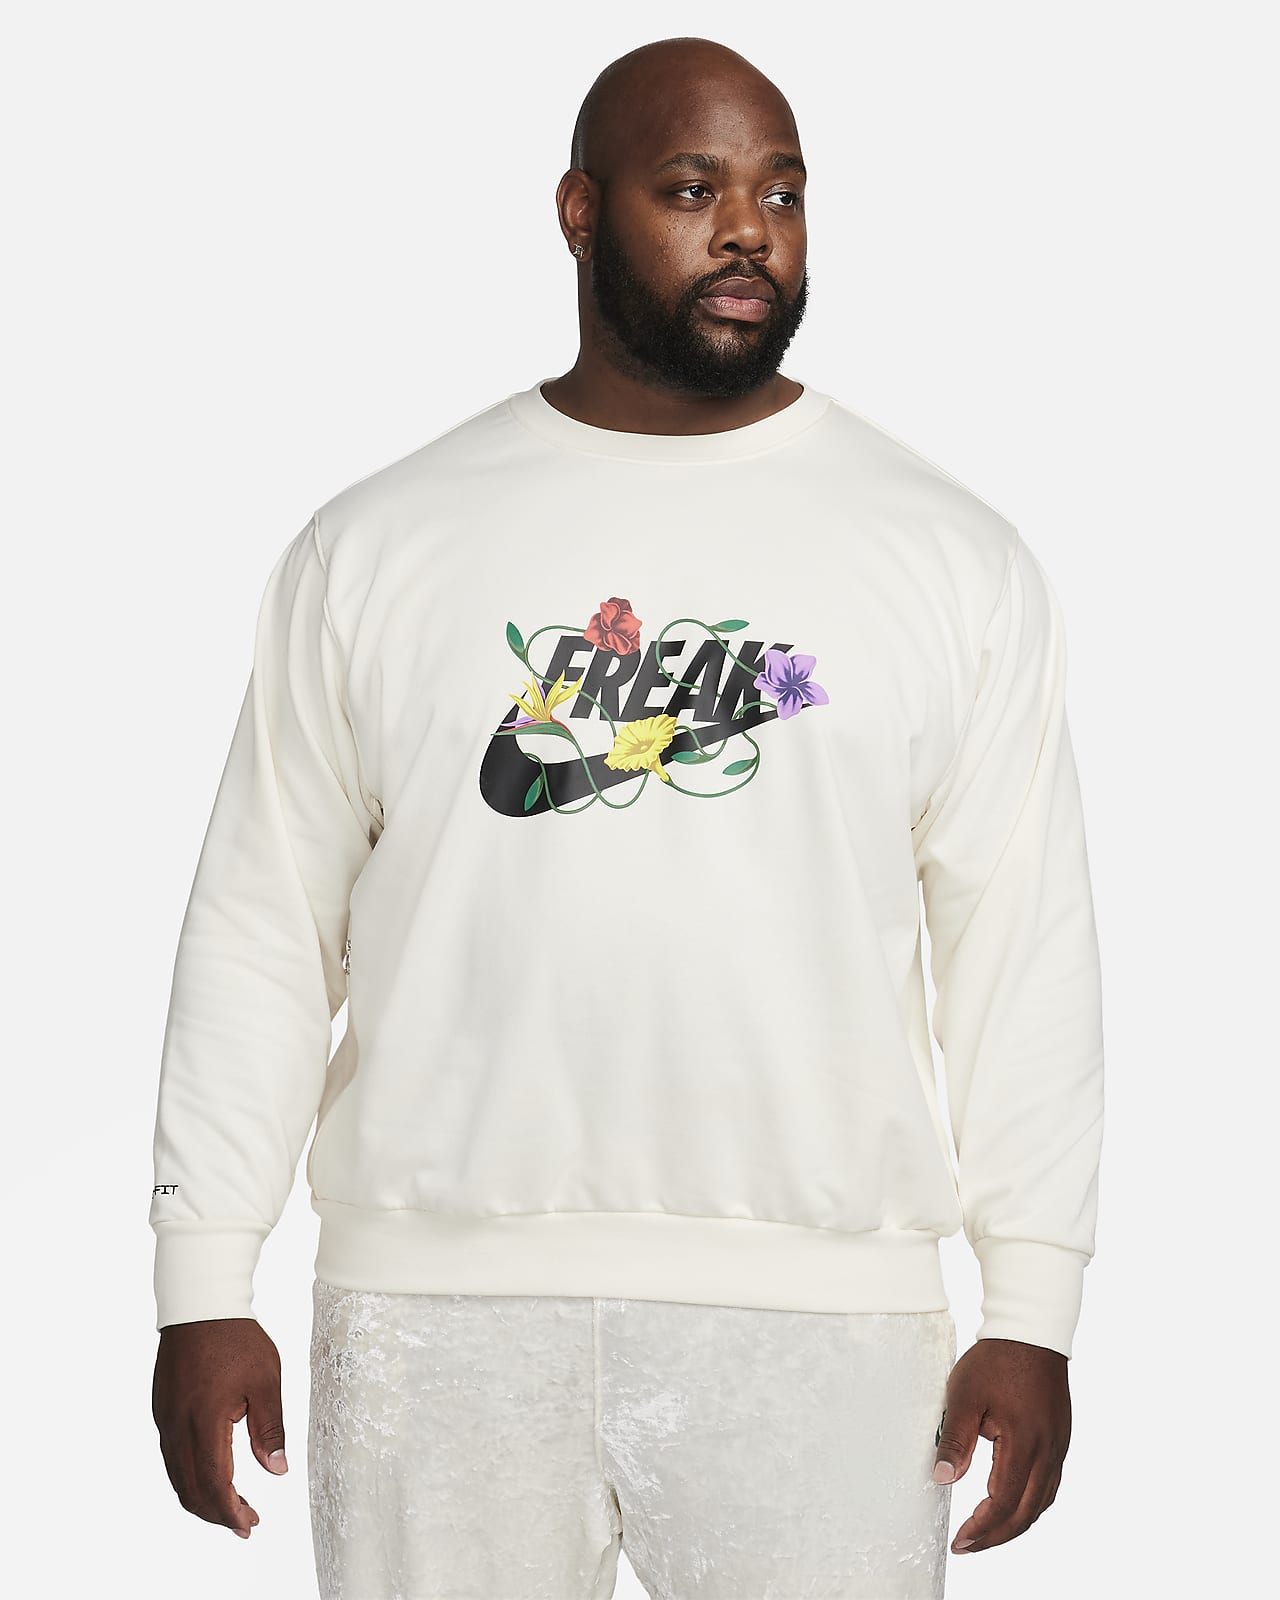 https://static.nike.com/a/images/t_PDP_1280_v1/f_auto,q_auto:eco/a972e00b-3c1c-464e-b3c8-e0c05216fa36/giannis-standard-issue-mens-graphic-basketball-crew-Q5dm6w.png